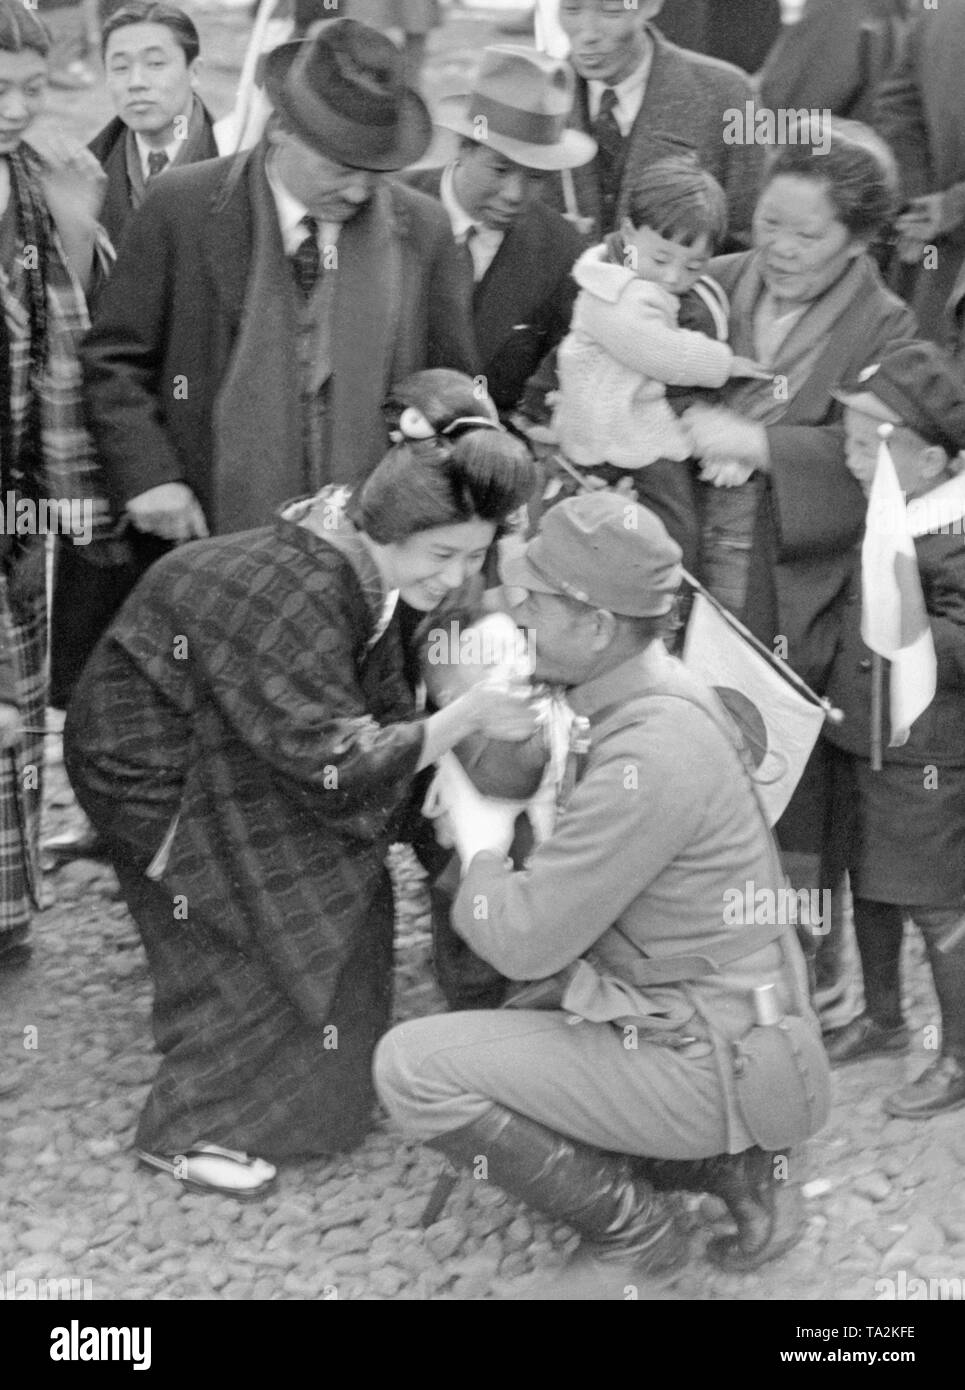 A soldier bids farewell to his wife and small child as he leaves to fight in the Second Japanese-Chinese War in China. All three are smiling. Stock Photo